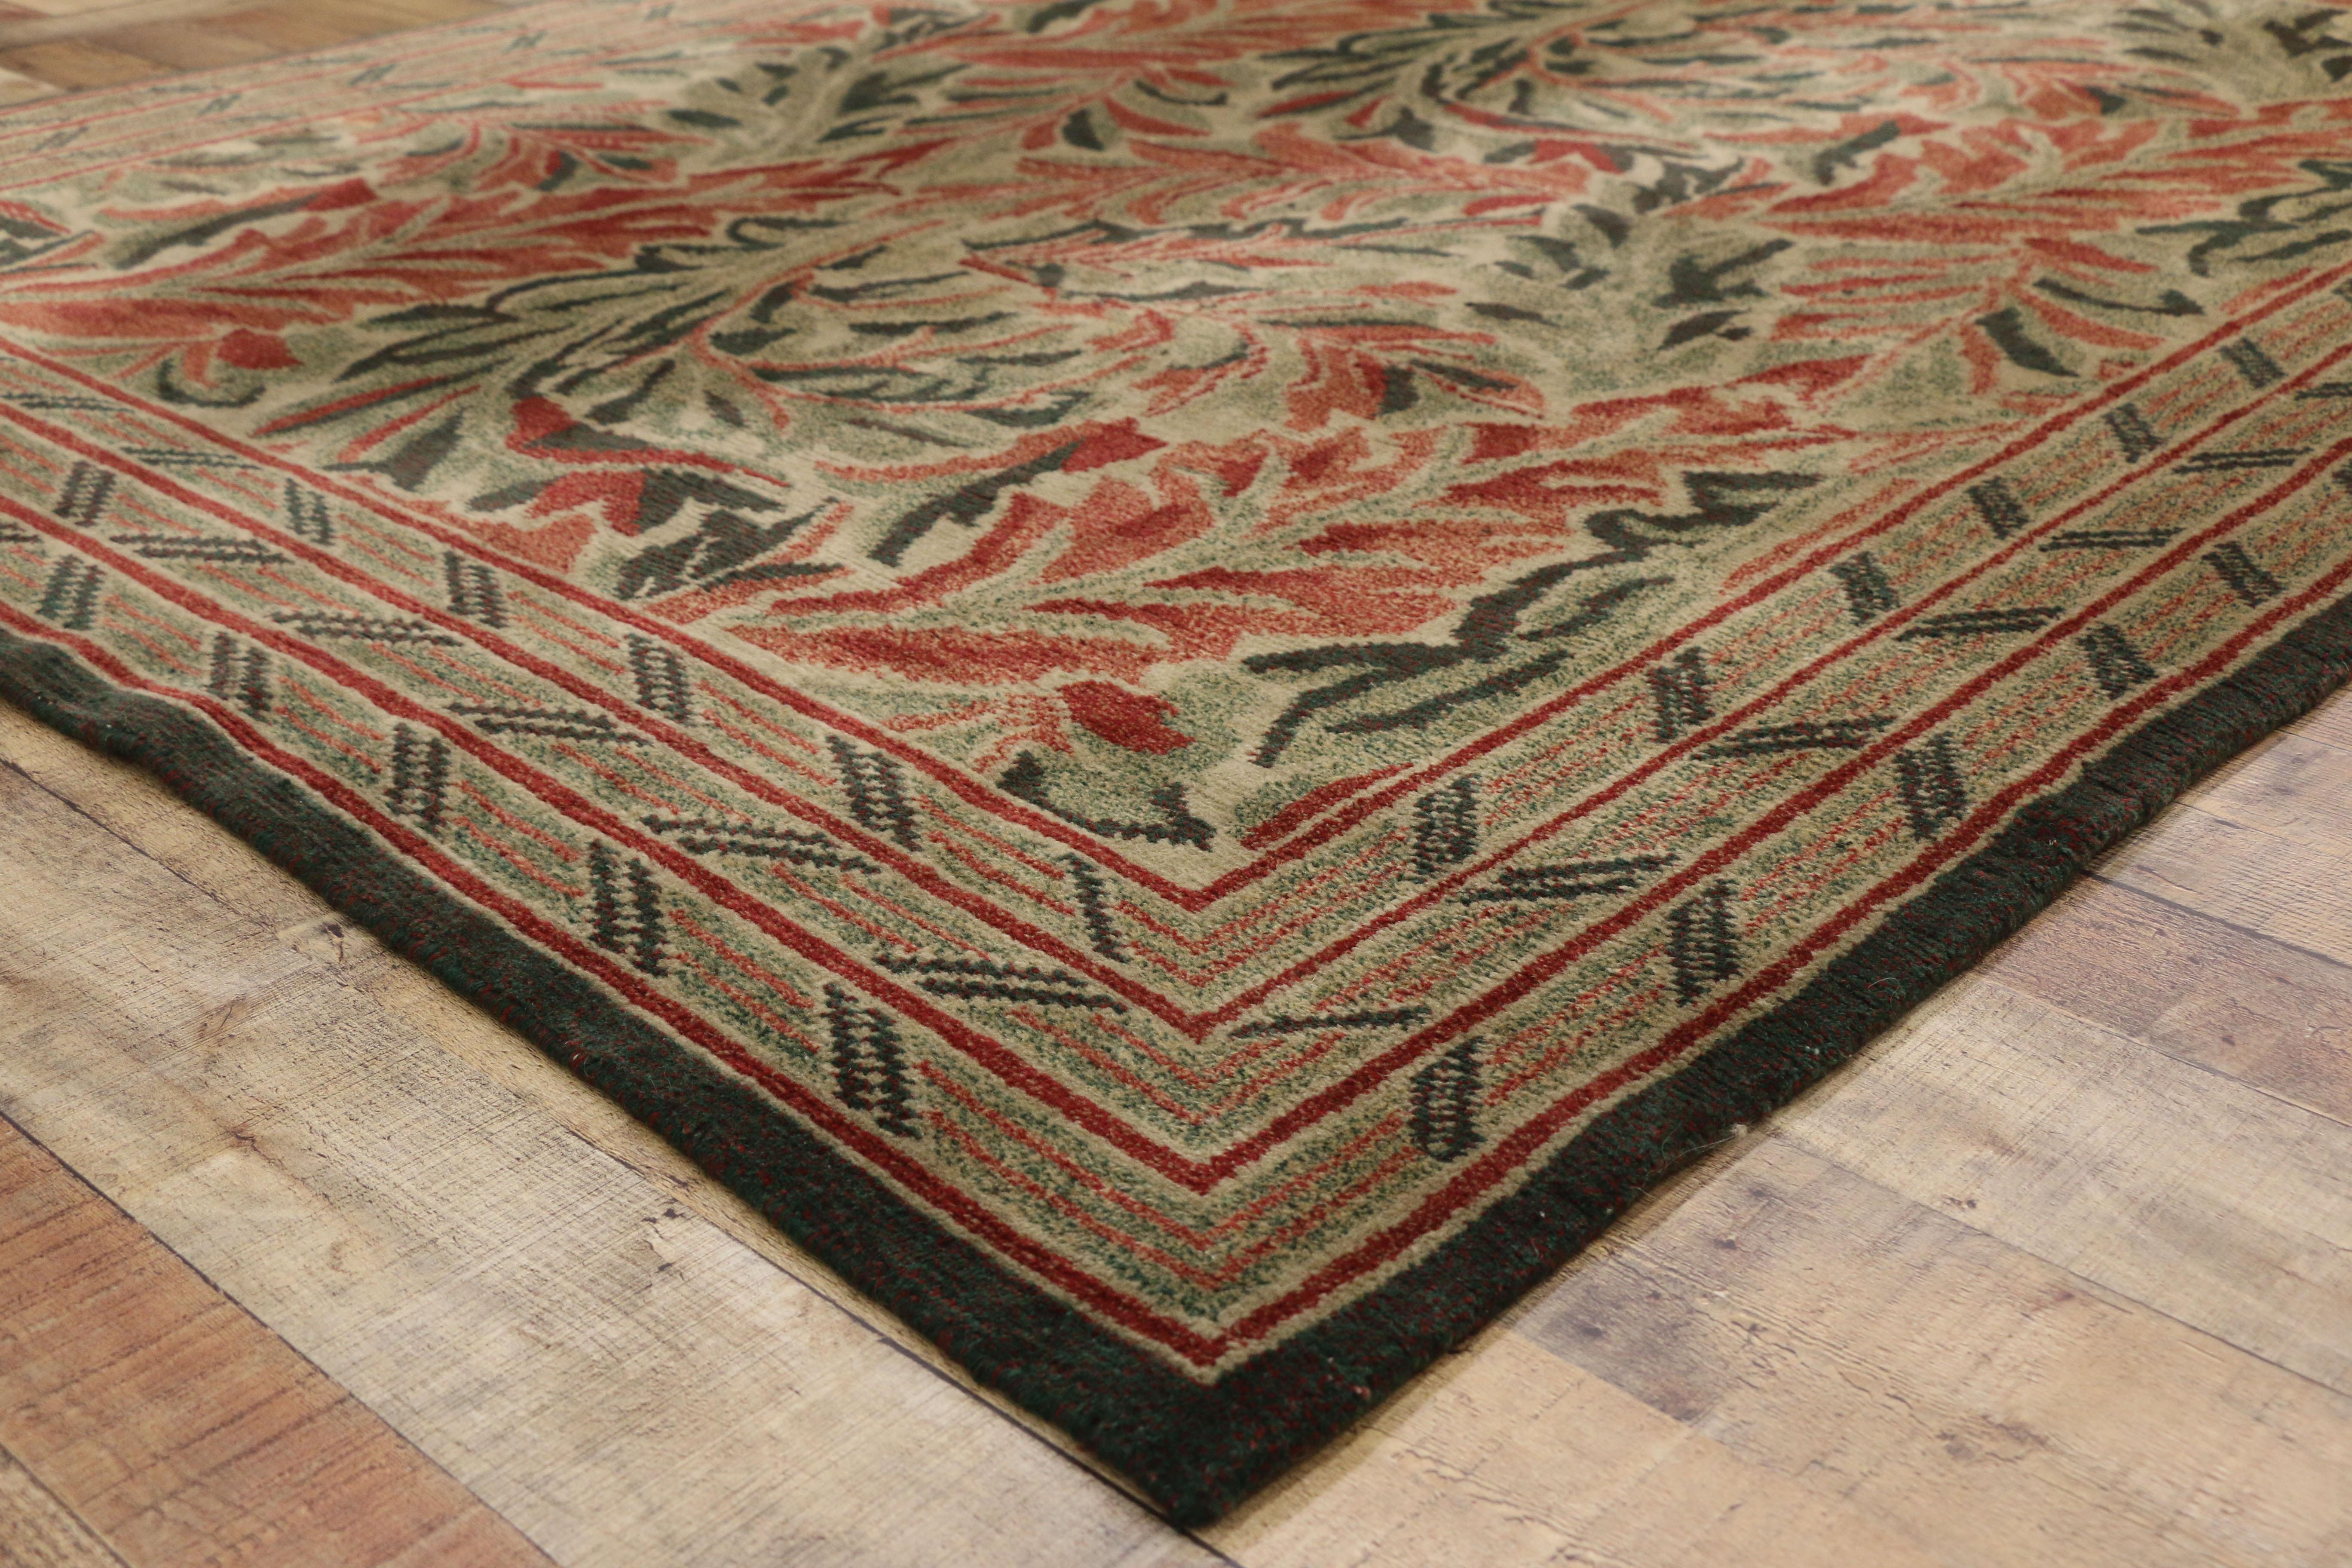 20th Century Vintage Swedish William Morris Acanthus Inspired Rug with Arts & Crafts Style